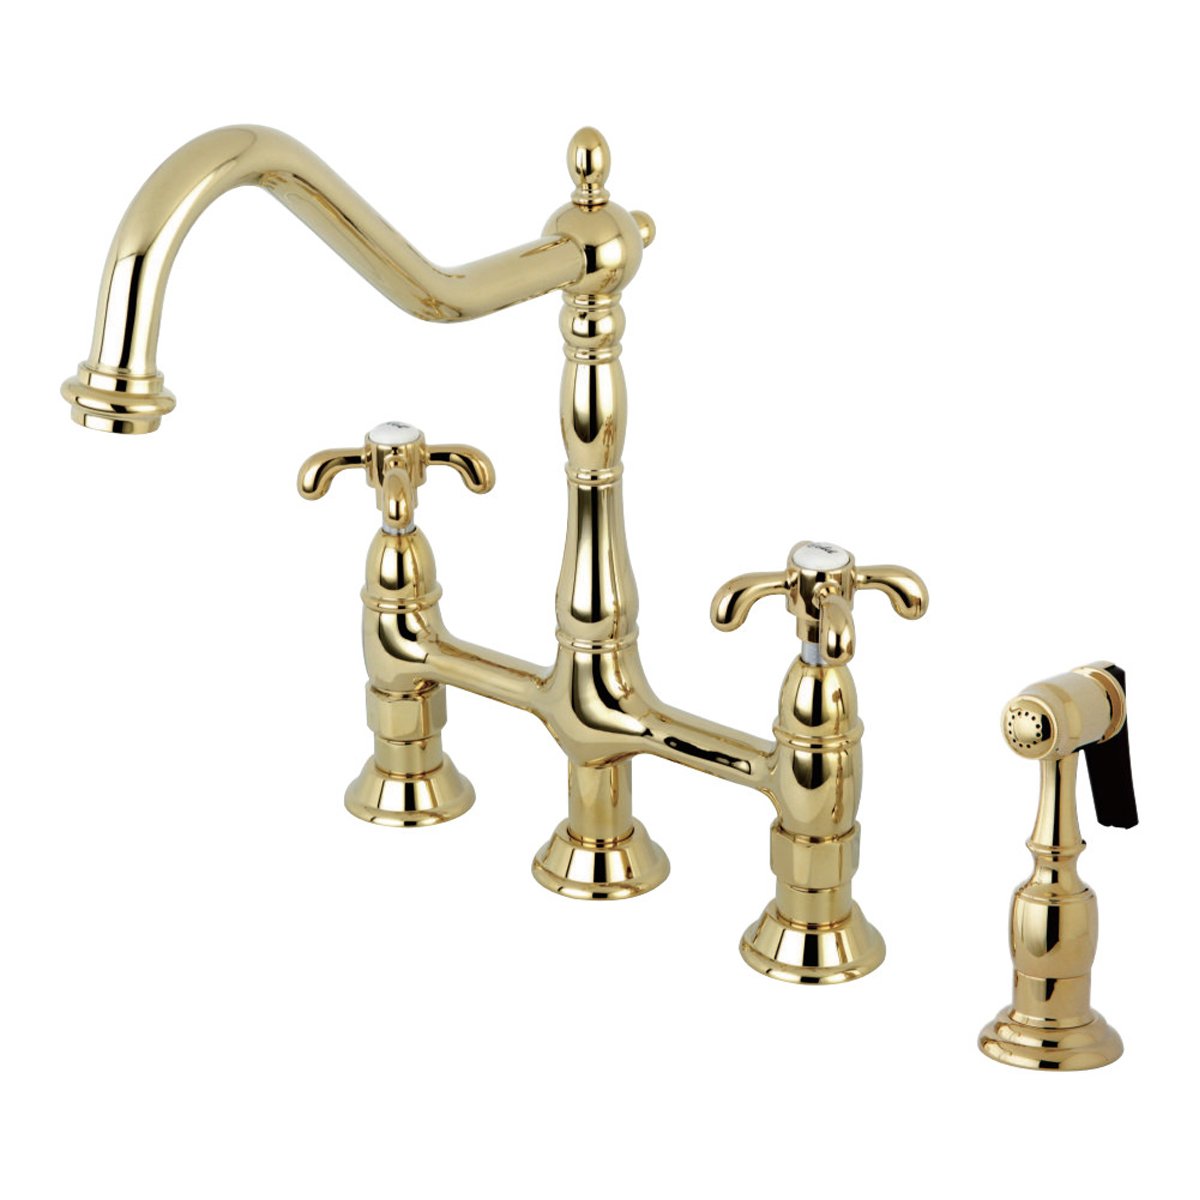 Kingston Brass French Country Kitchen Bridge Faucet with Brass